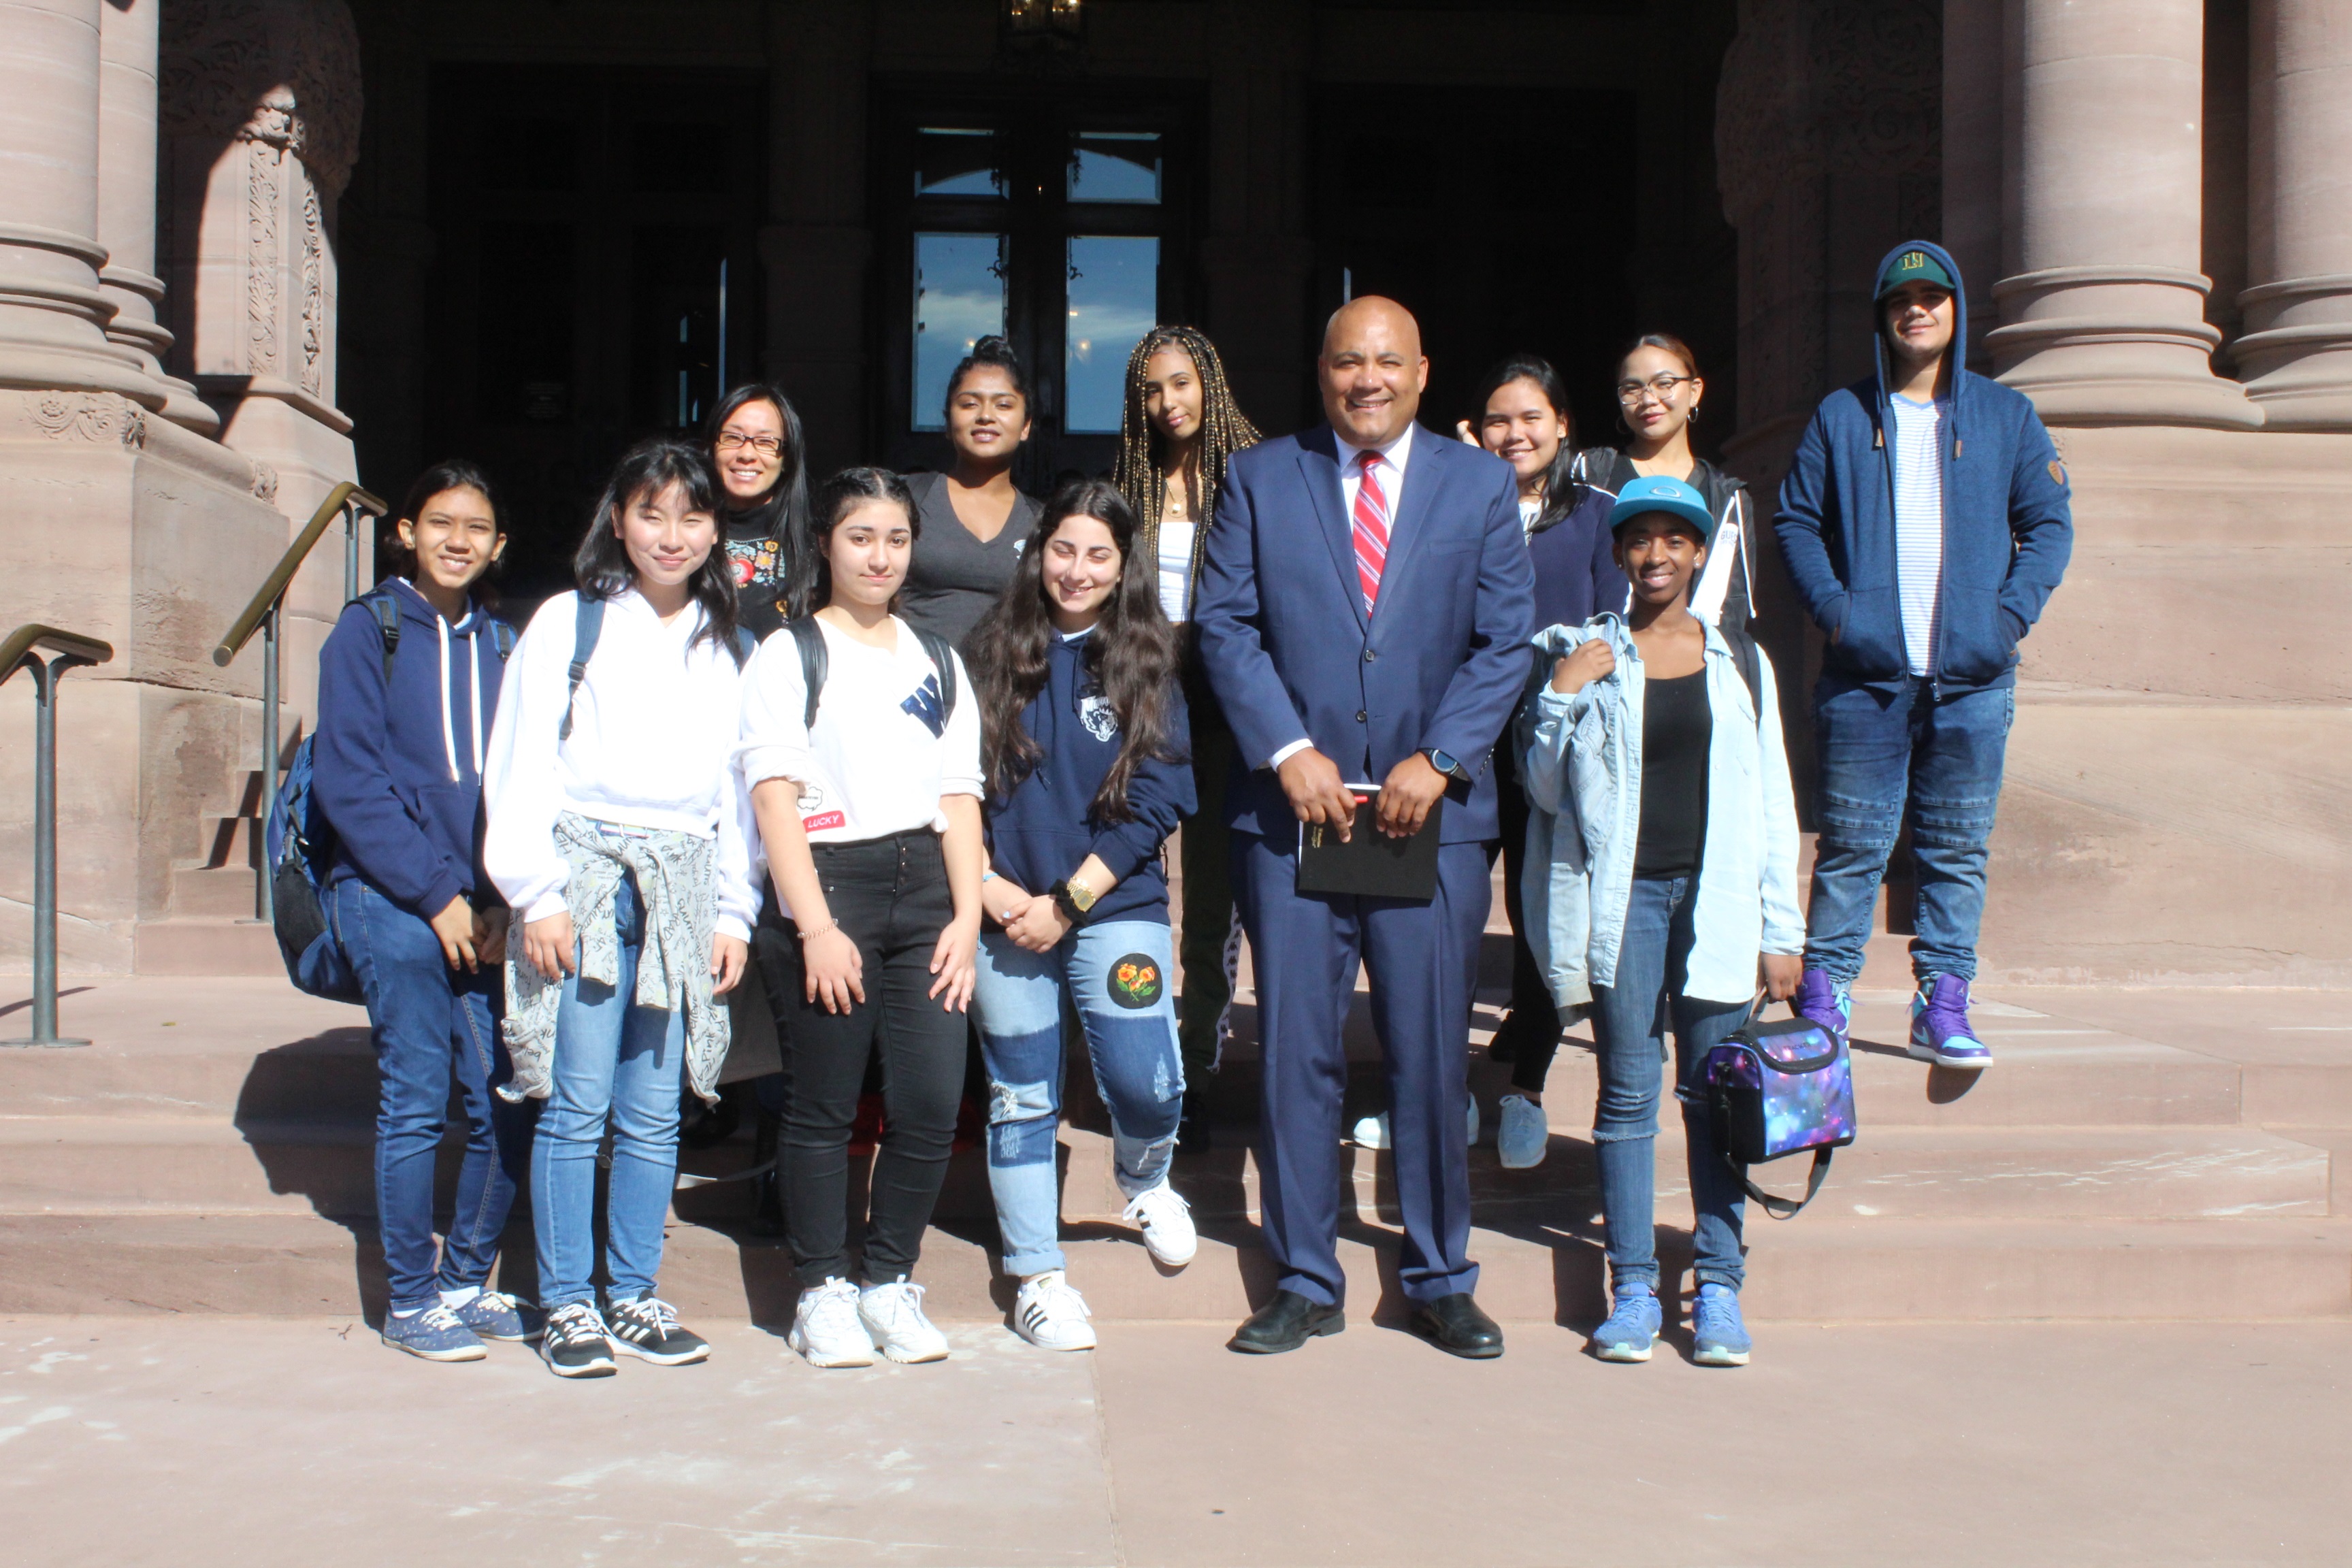 Trip to Queens Park: Meeting with Michael Coteau (MPP) Open Gallery